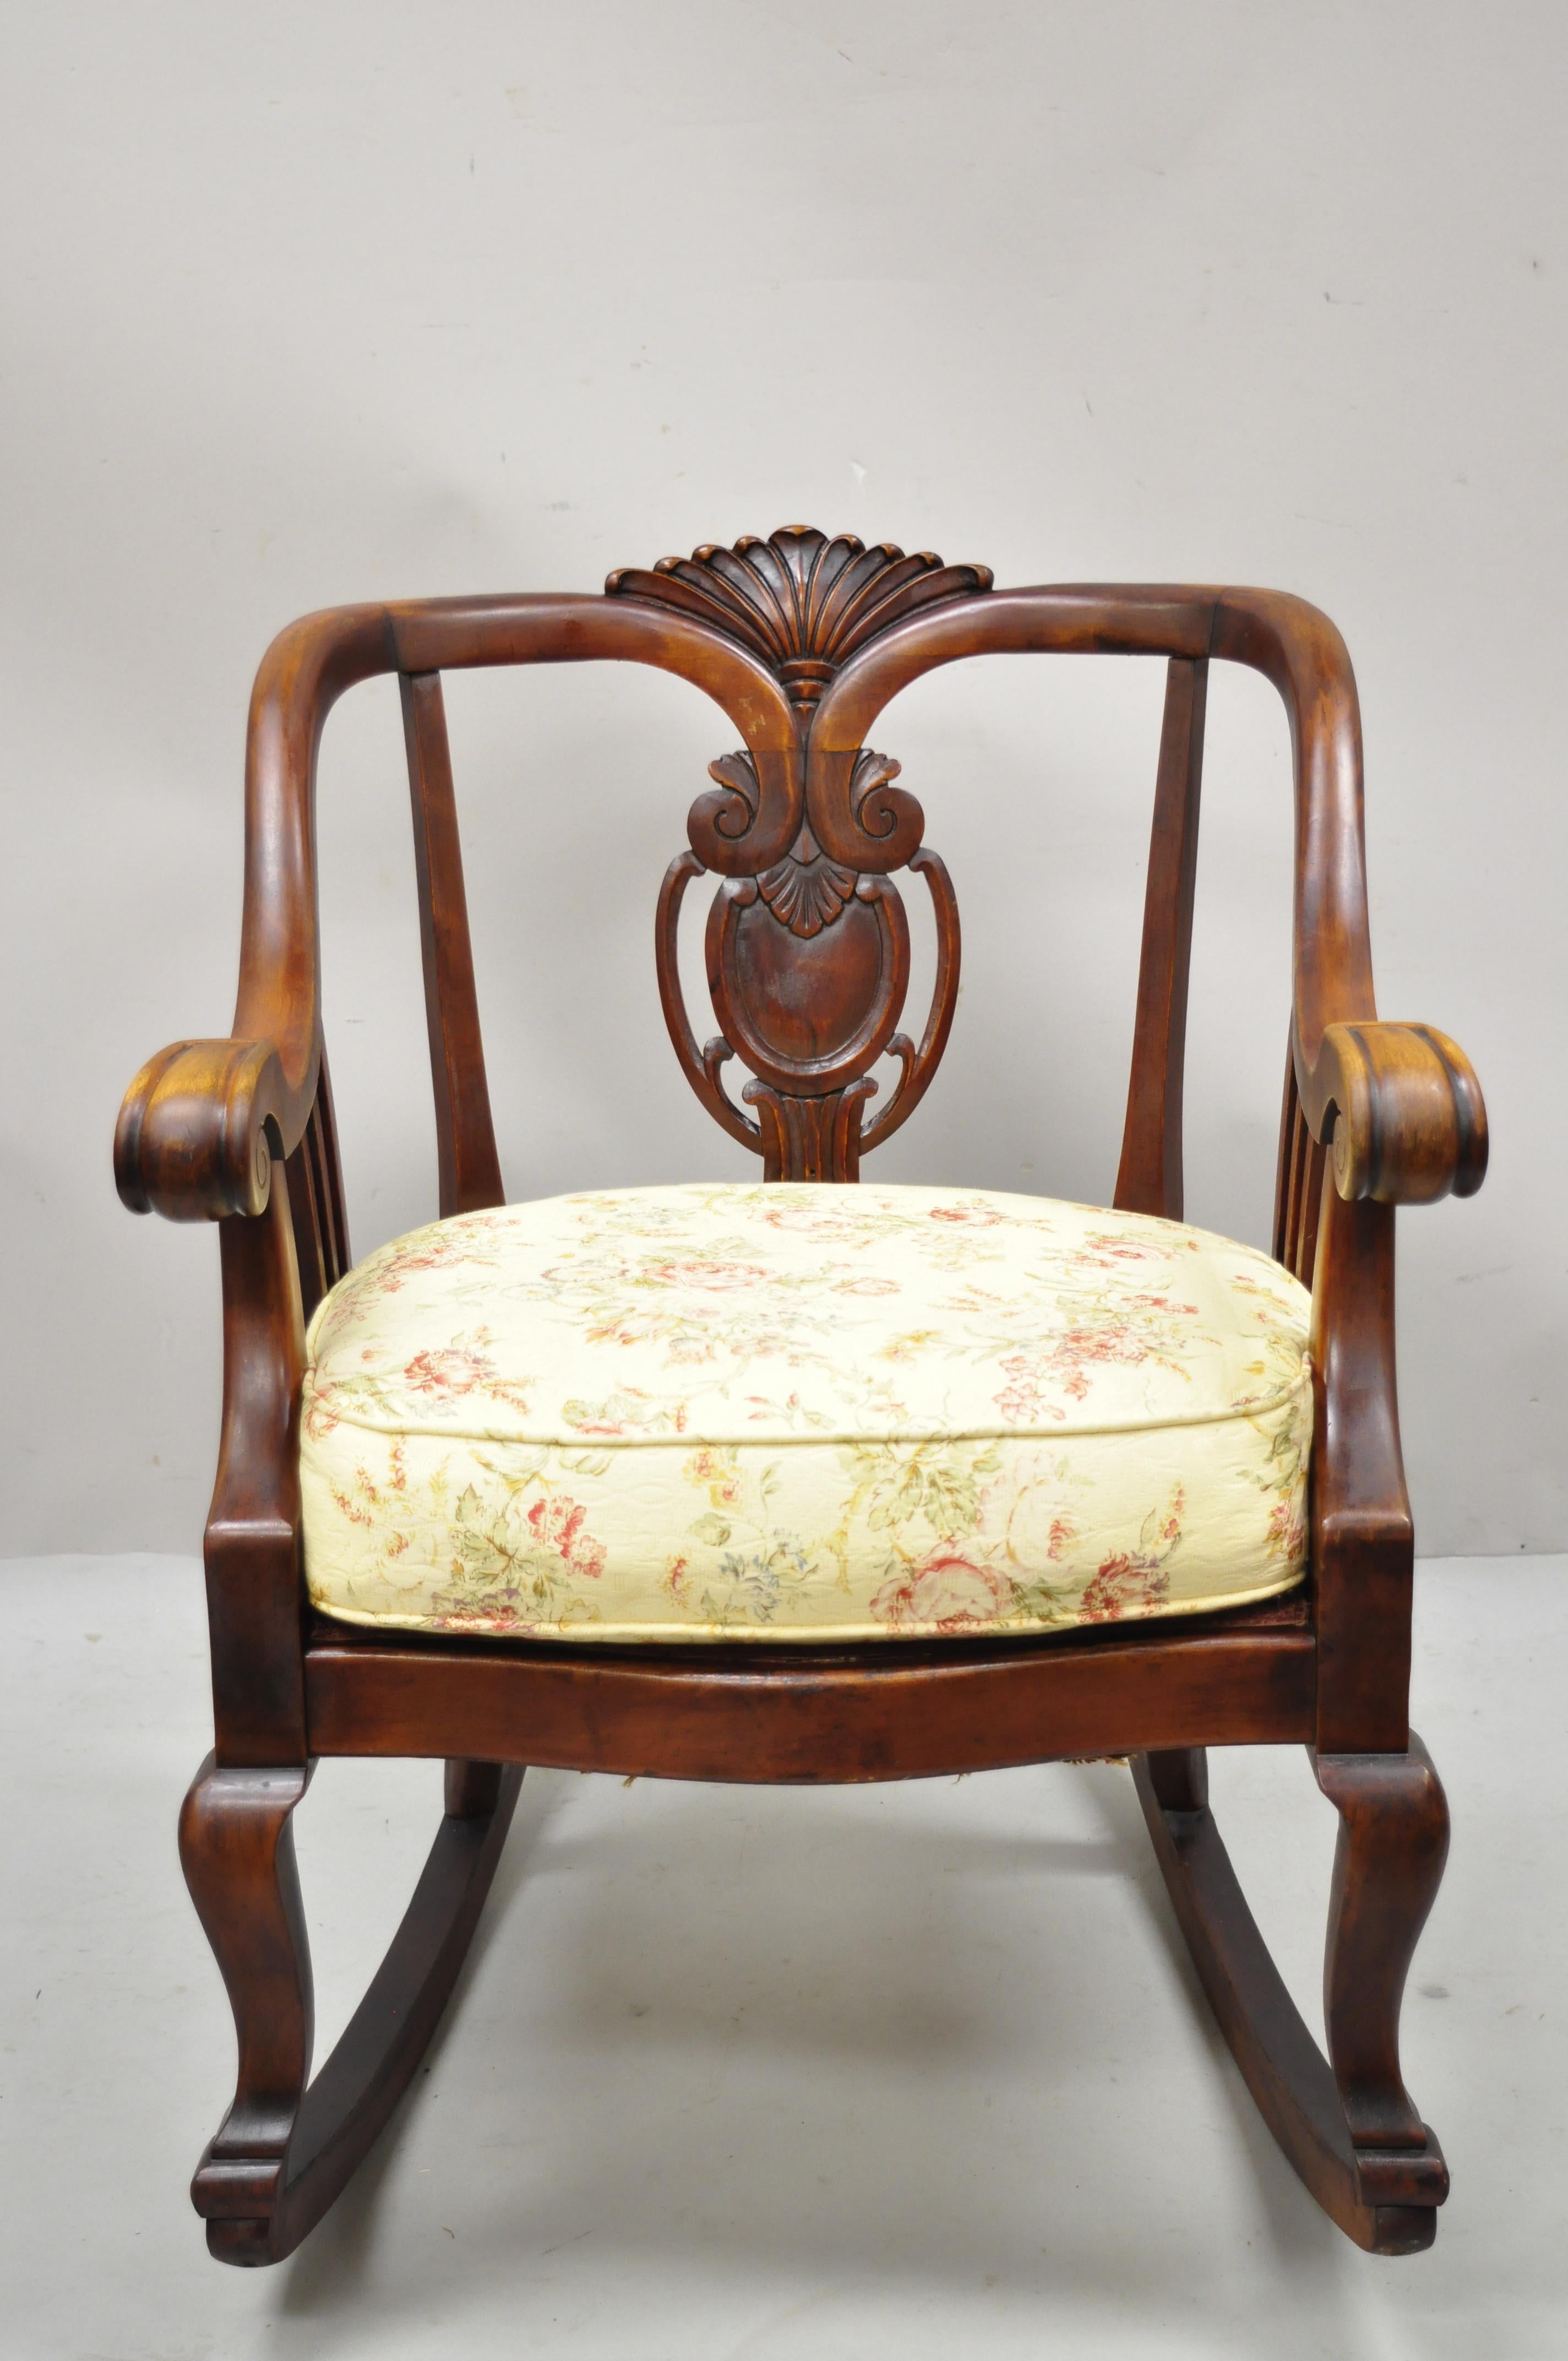 Antique American Empire Victorian solid mahogany rocker rocking chair. Item features nicely carved details, solid wood frame, beautiful wood grain, upholstered seat, very nice antique item, quality American craftsmanship, great style and form, Circa